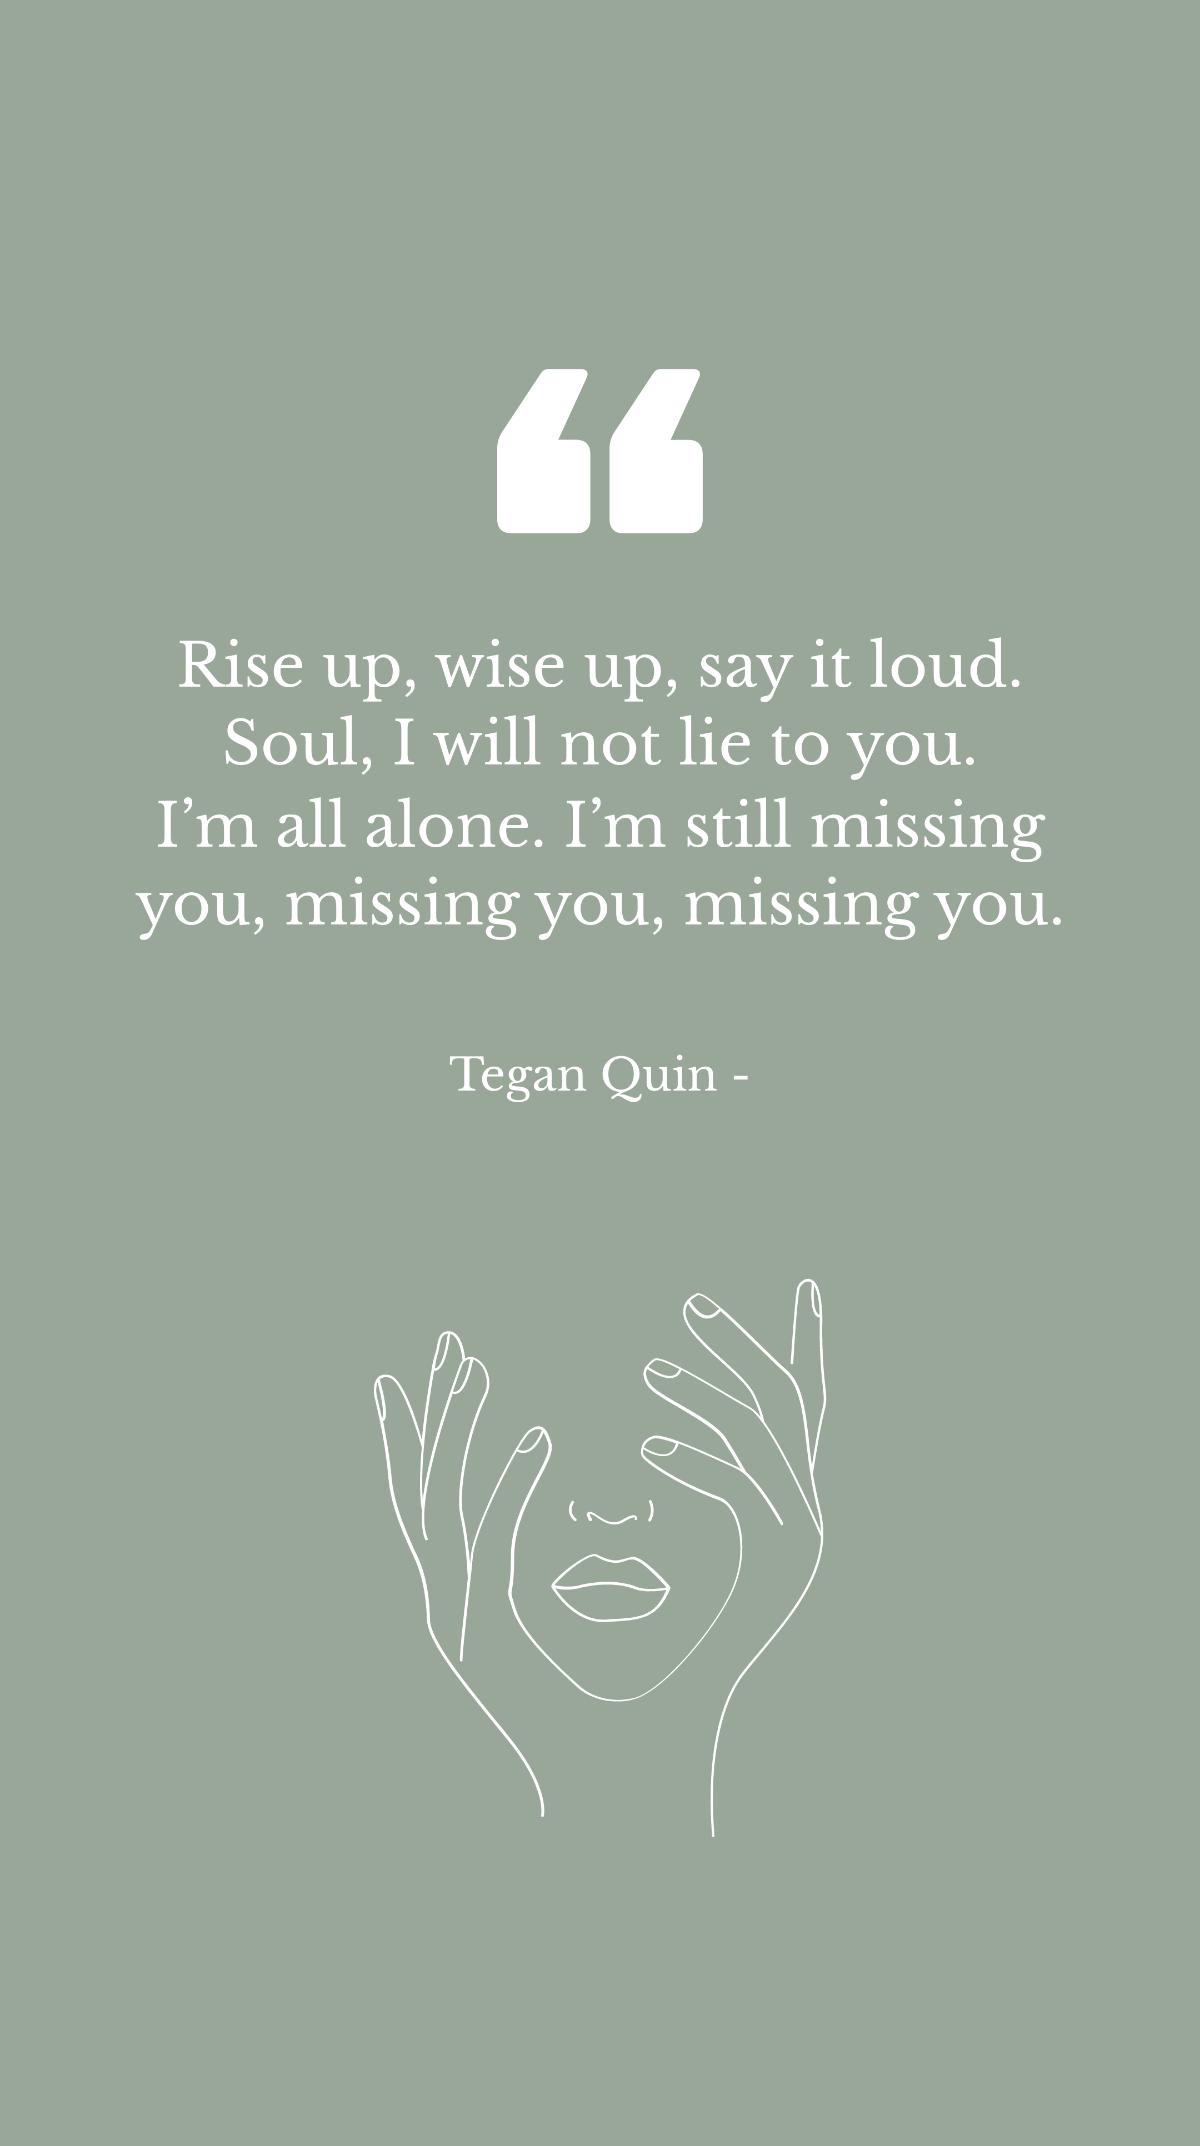 Free Tegan Quin - Rise up, wise up, say it loud. Soul, I will not lie to you. I’m all alone. I’m still missing you, missing you, missing you. Template